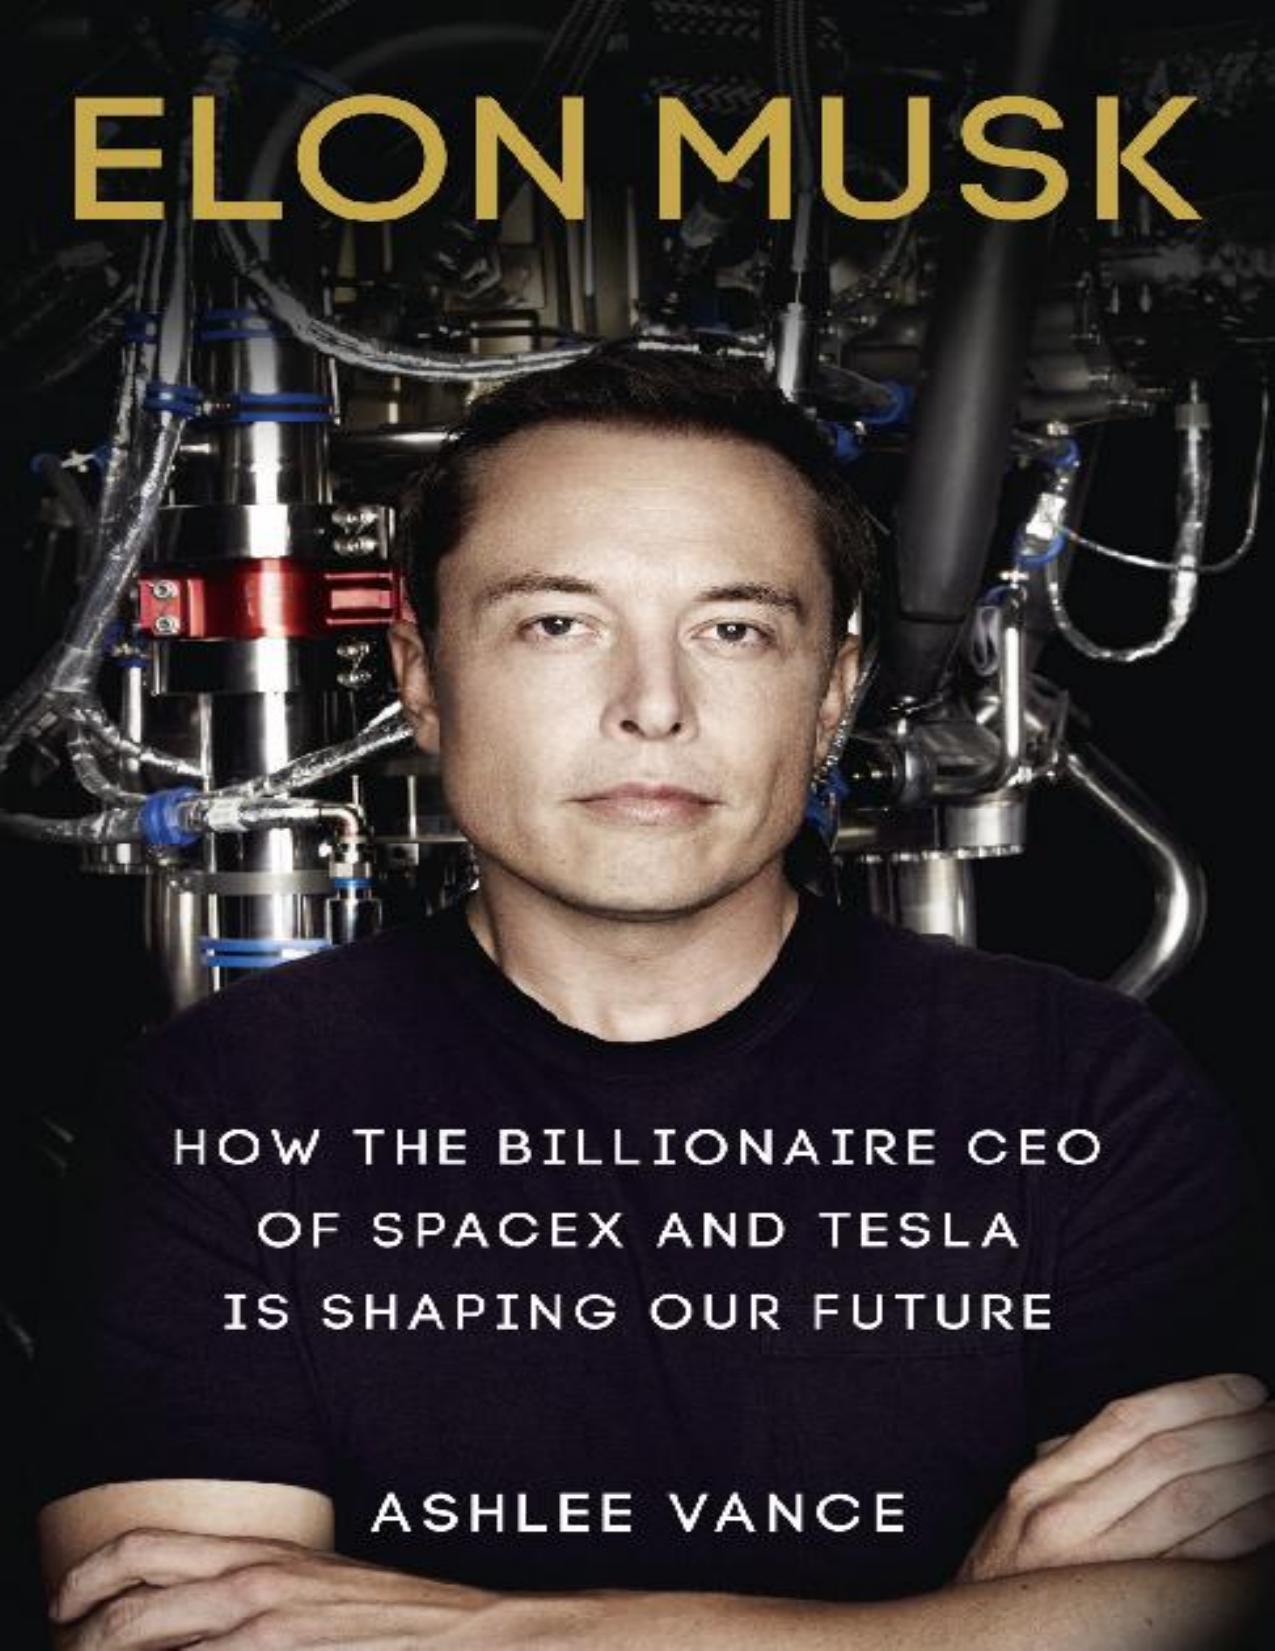 Elon Musk. How The Billionaire Ceo Of Spacex And Tesla Is Shaping Our Future